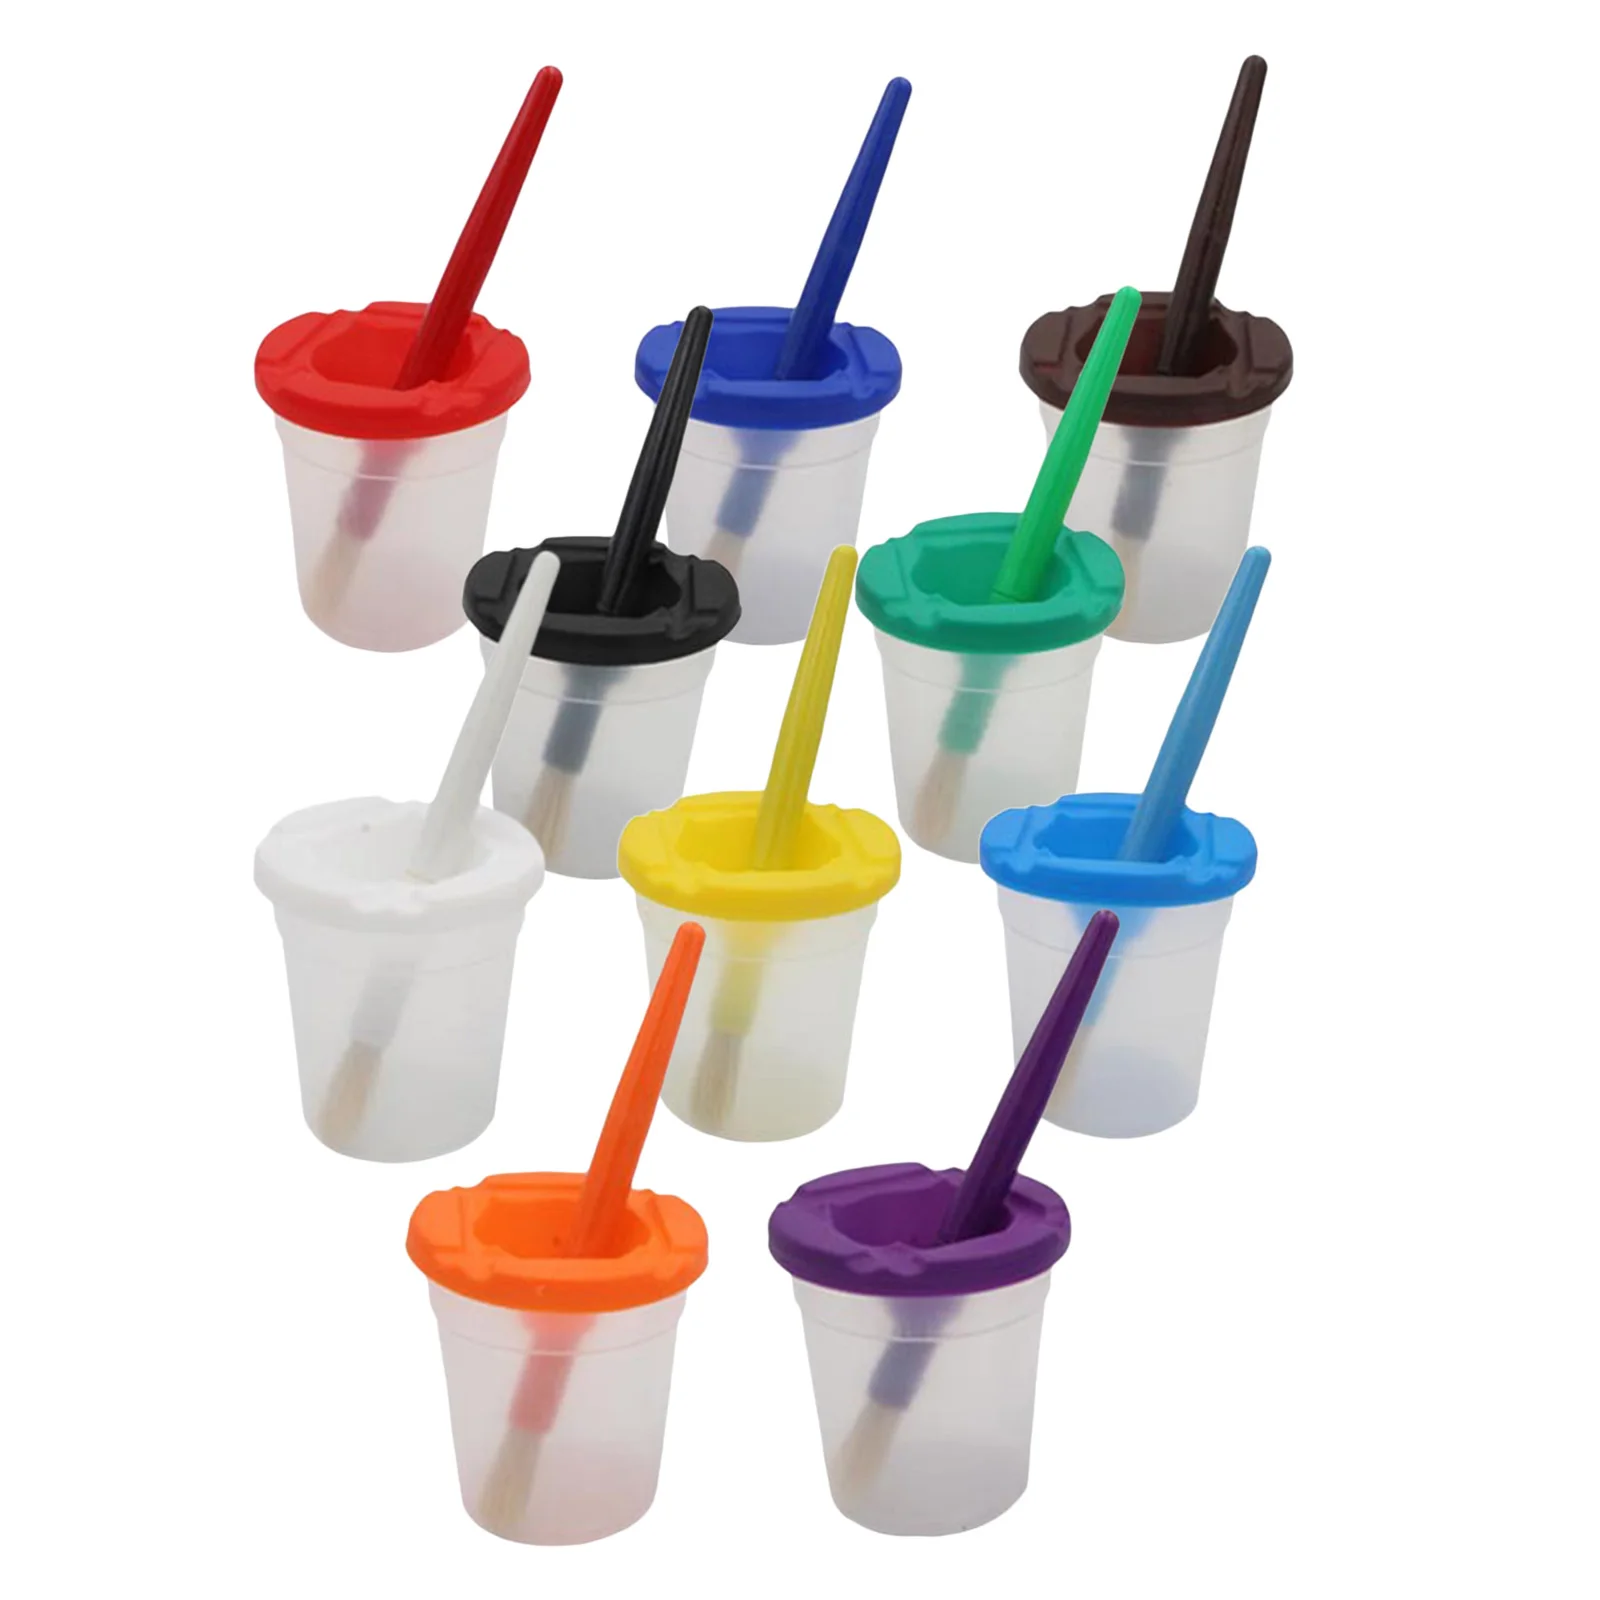 5pcs Spill Proof Paint Cups and 5pcs with Lids Round Paint Brushes for Kids Children`s Paintbrushes